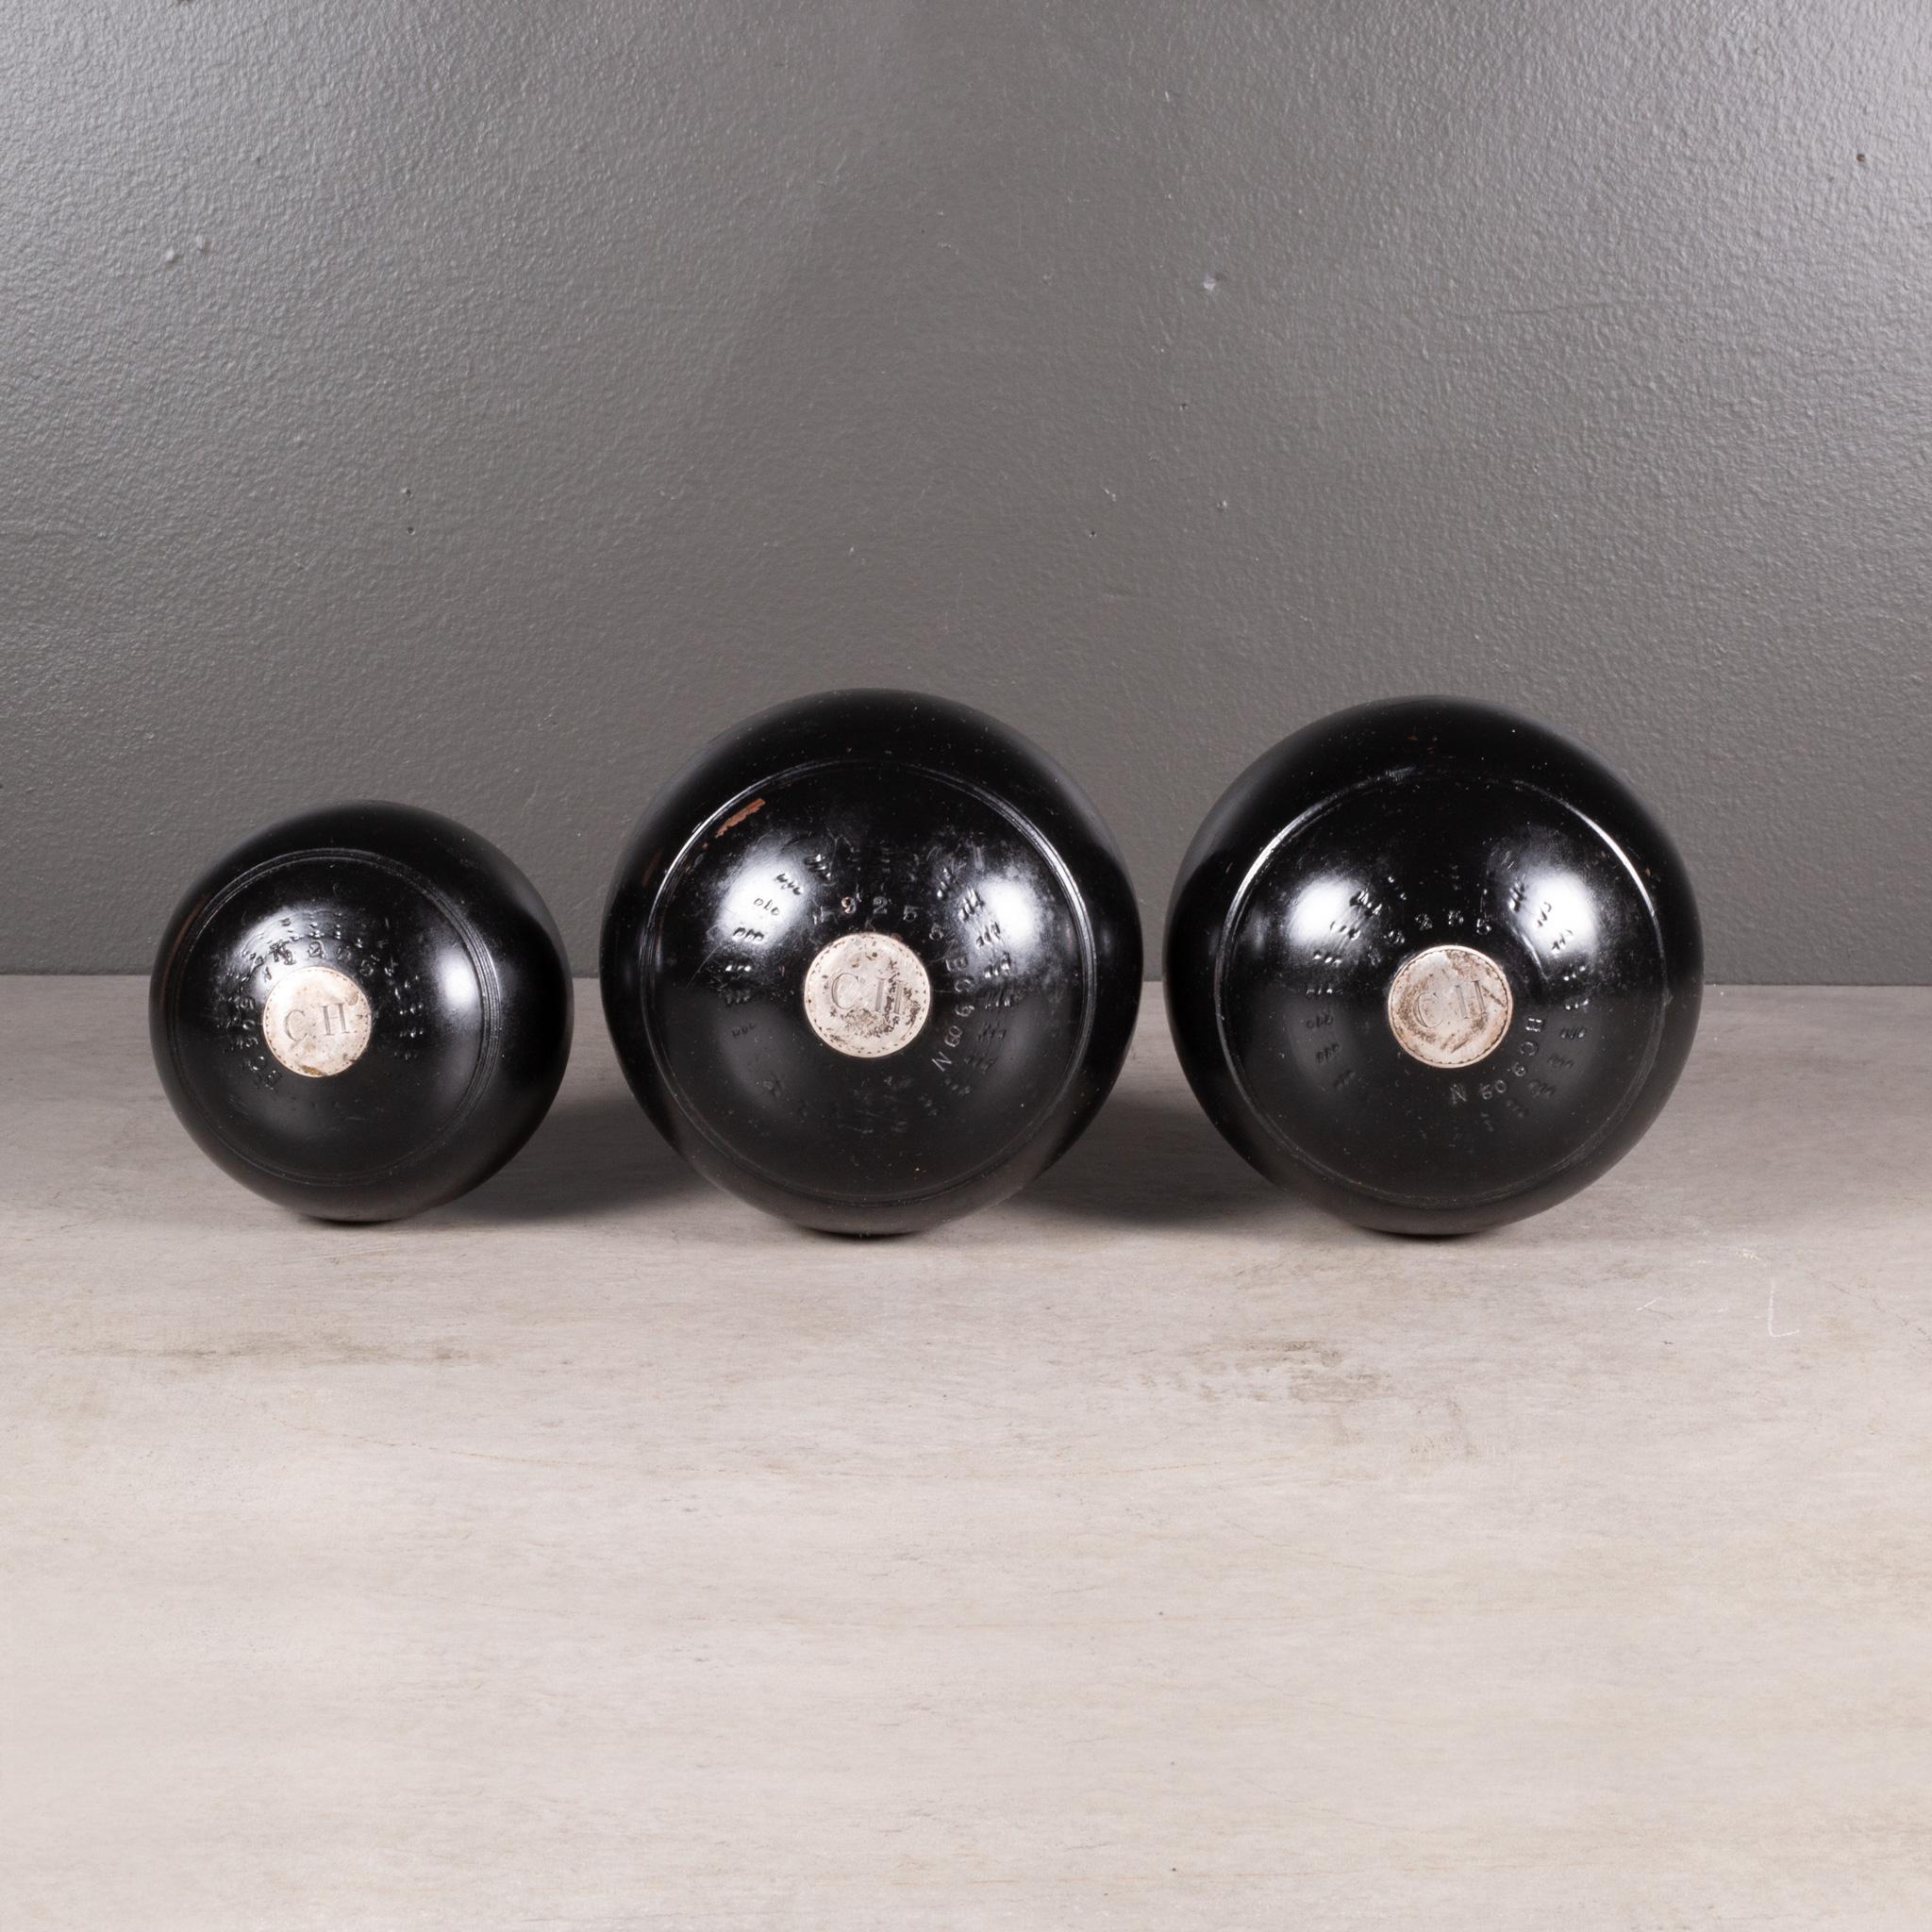 ABOUT

A set of English lawn bowls made of Lignum Vitae Wood inlaid with sterling silver. Monogrammed 